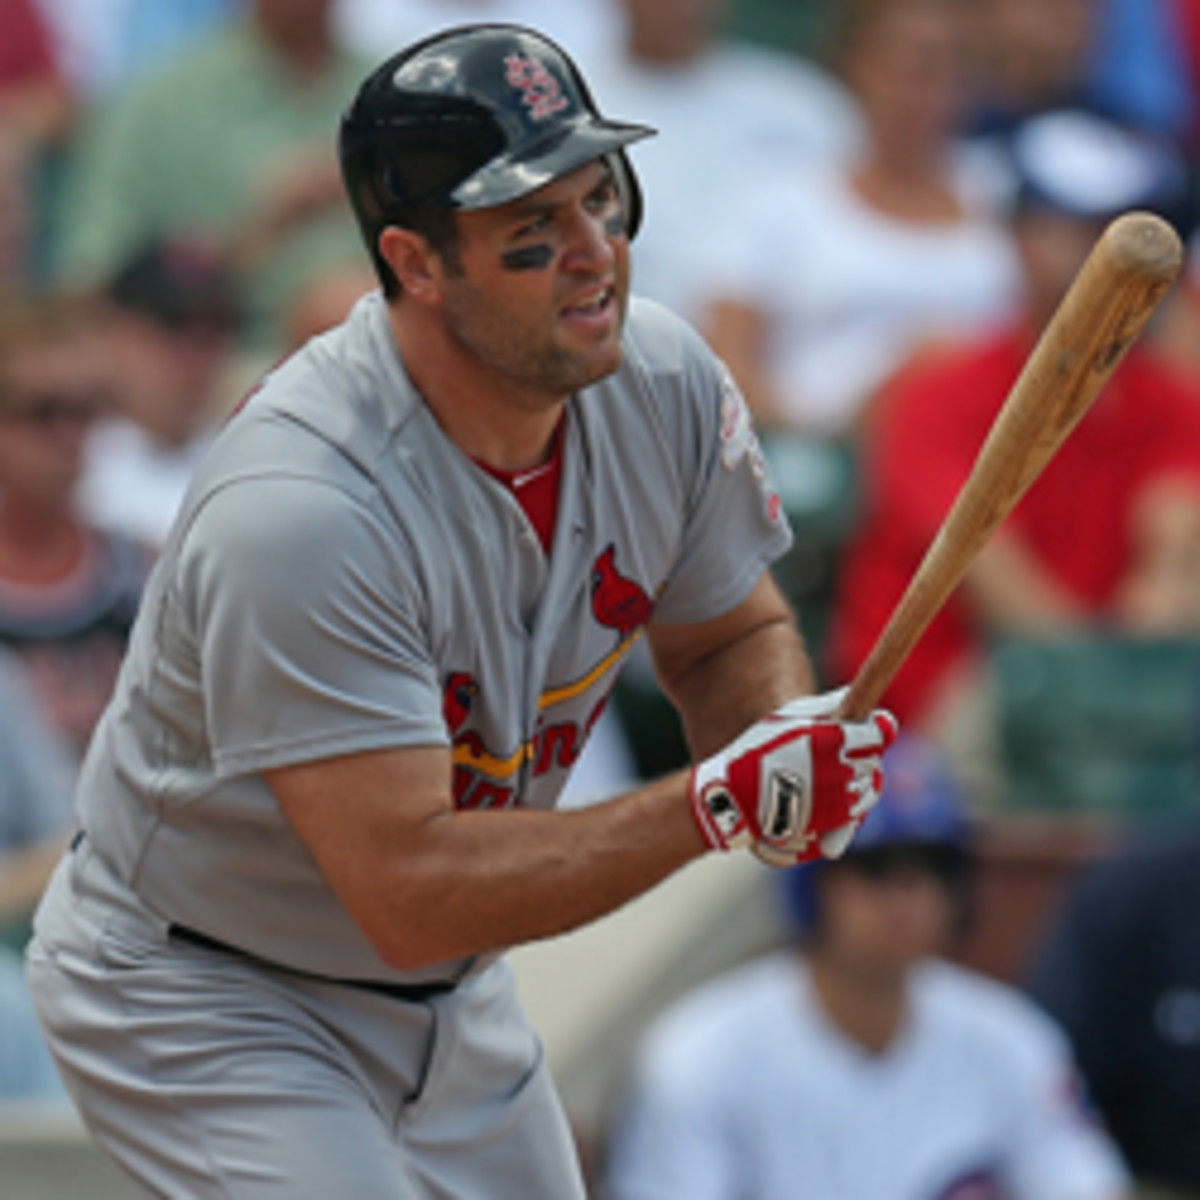 Free-agent Lance Berkman signed a one-year deal with the Texas Rangers. (Jonathan Daniel/Getty Images)